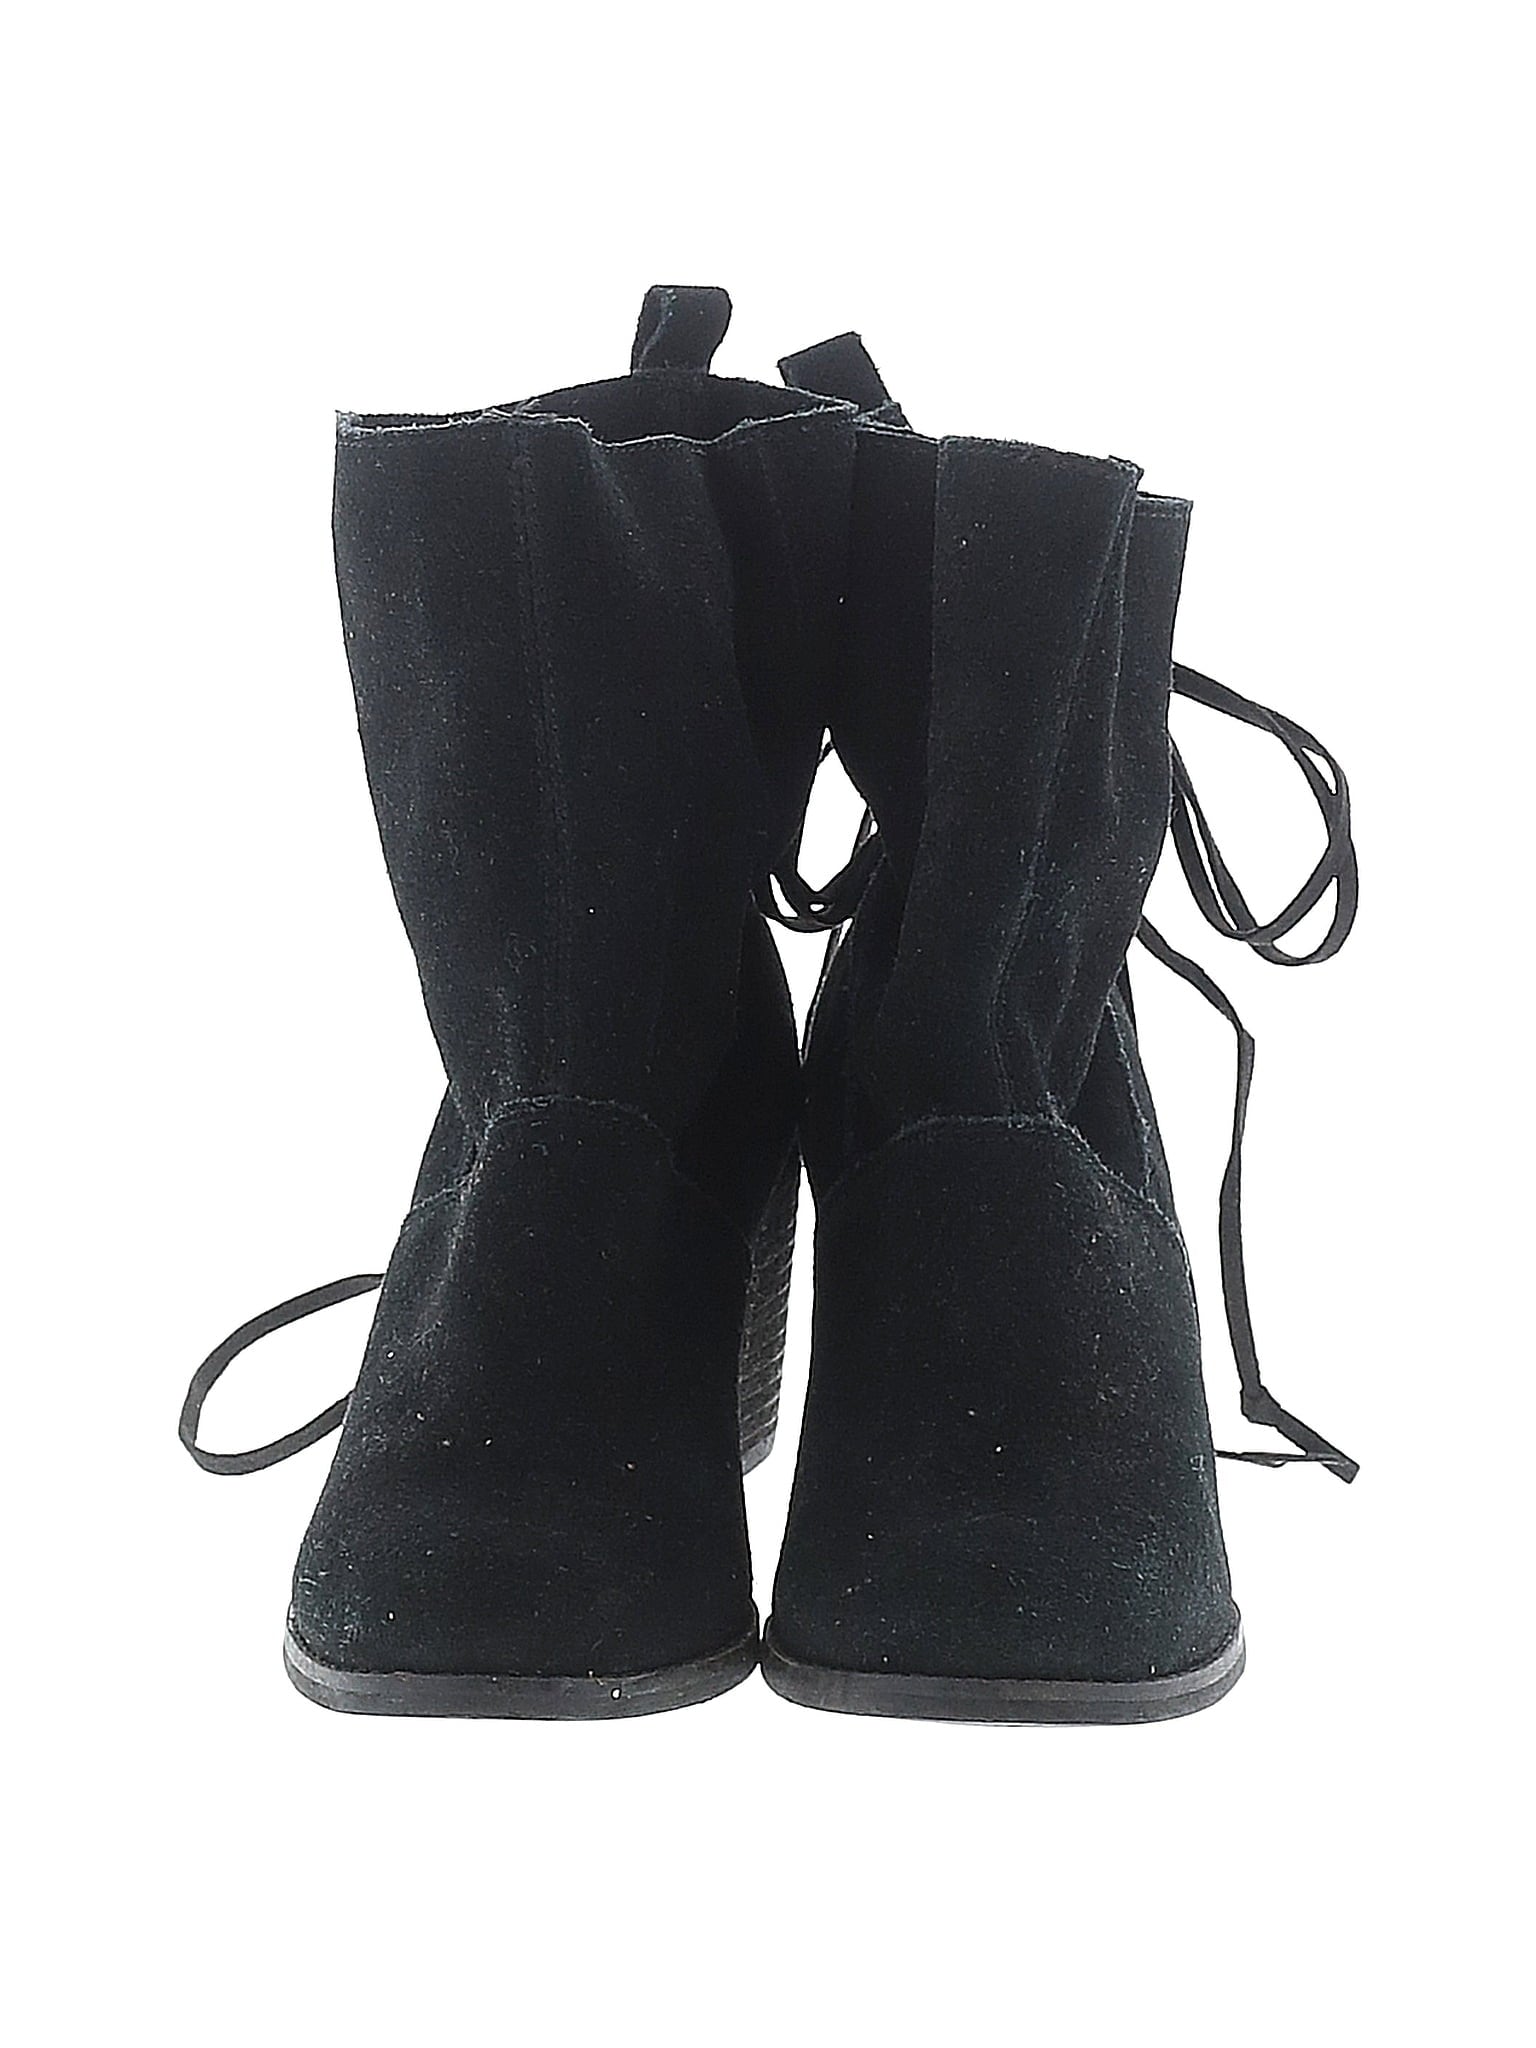 Ankle Boots shoe size - 5 1/2